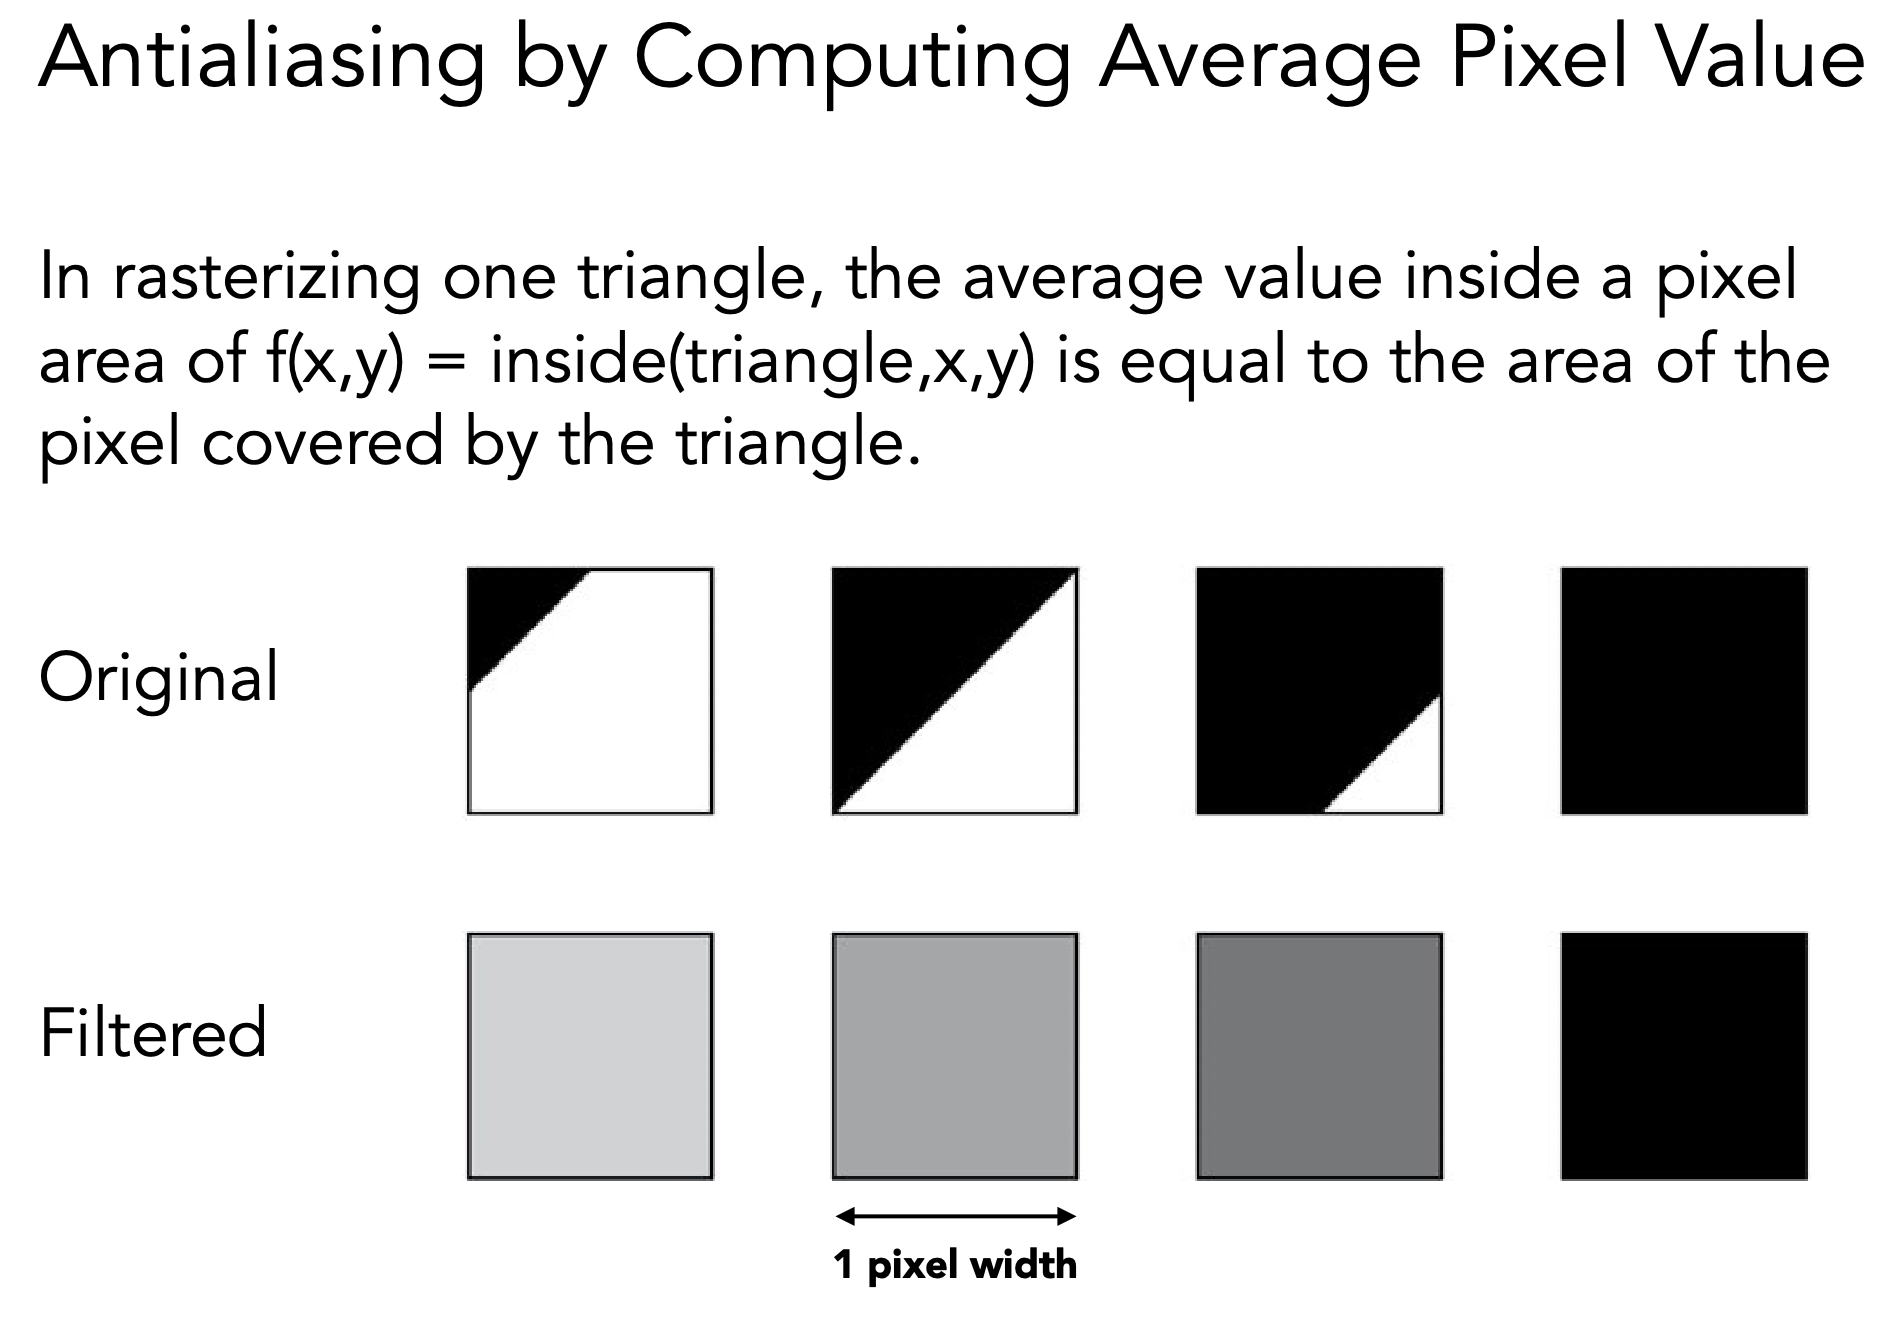 Antialiasing by averaging values in pixel area